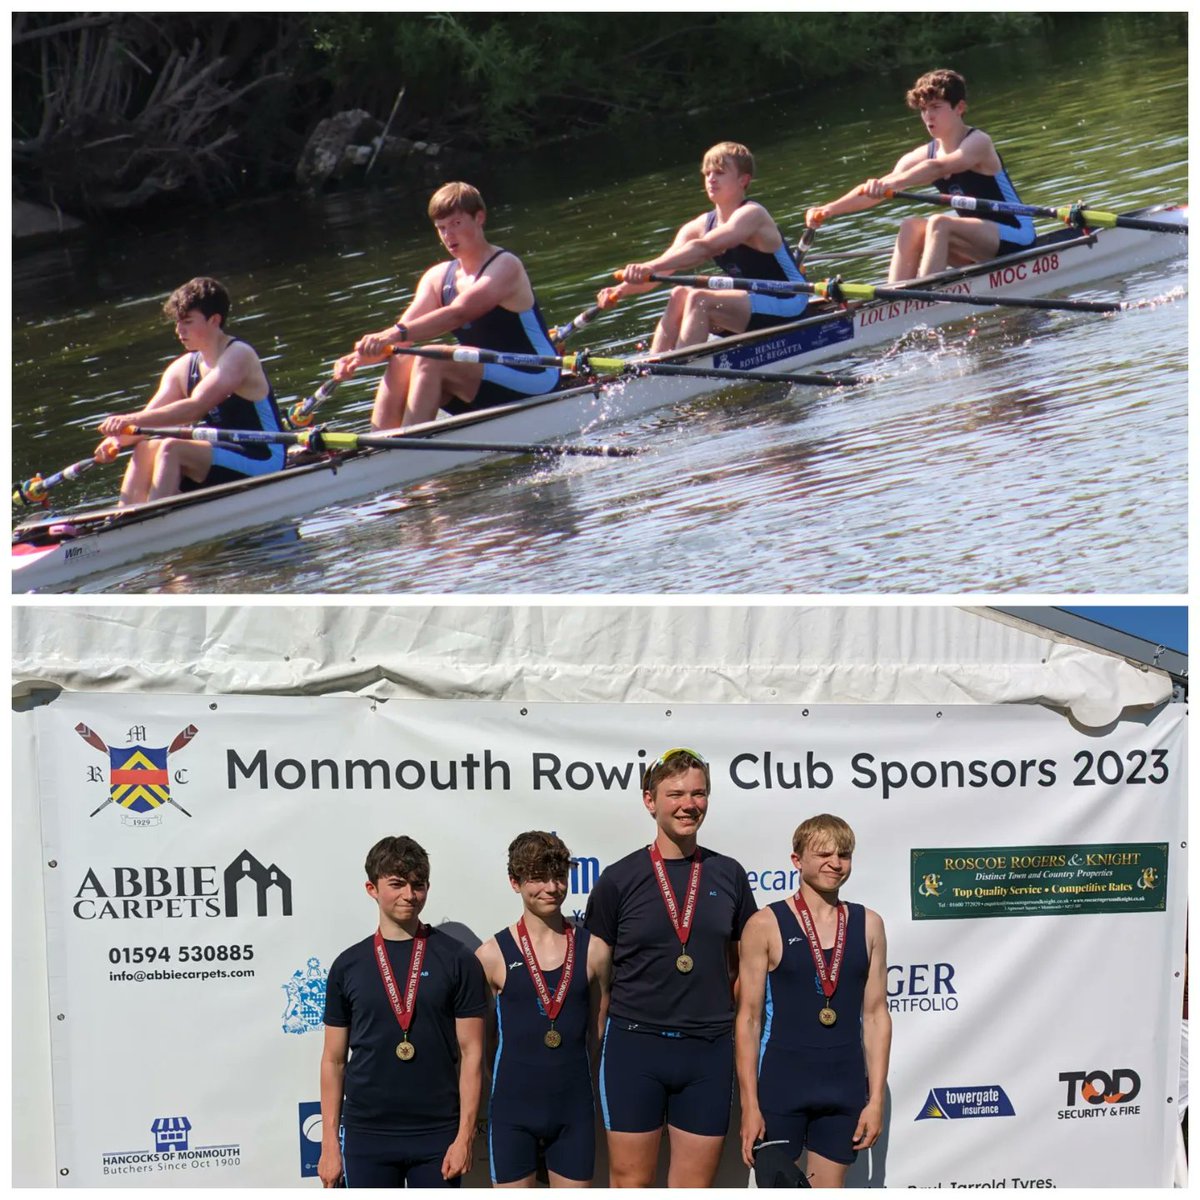 Great weekend of racing for the club at the home regatta with 21 crews racing from the club over the weekend!!!
Great to so many members racing and showcasing the club's talent and depth.

5 wins for the club!! 
Open 2- 🥇
WJ18 2- 🥇
J14 4x+ 🥇
J15 4x+ 🥇
J16 4x- 🥇